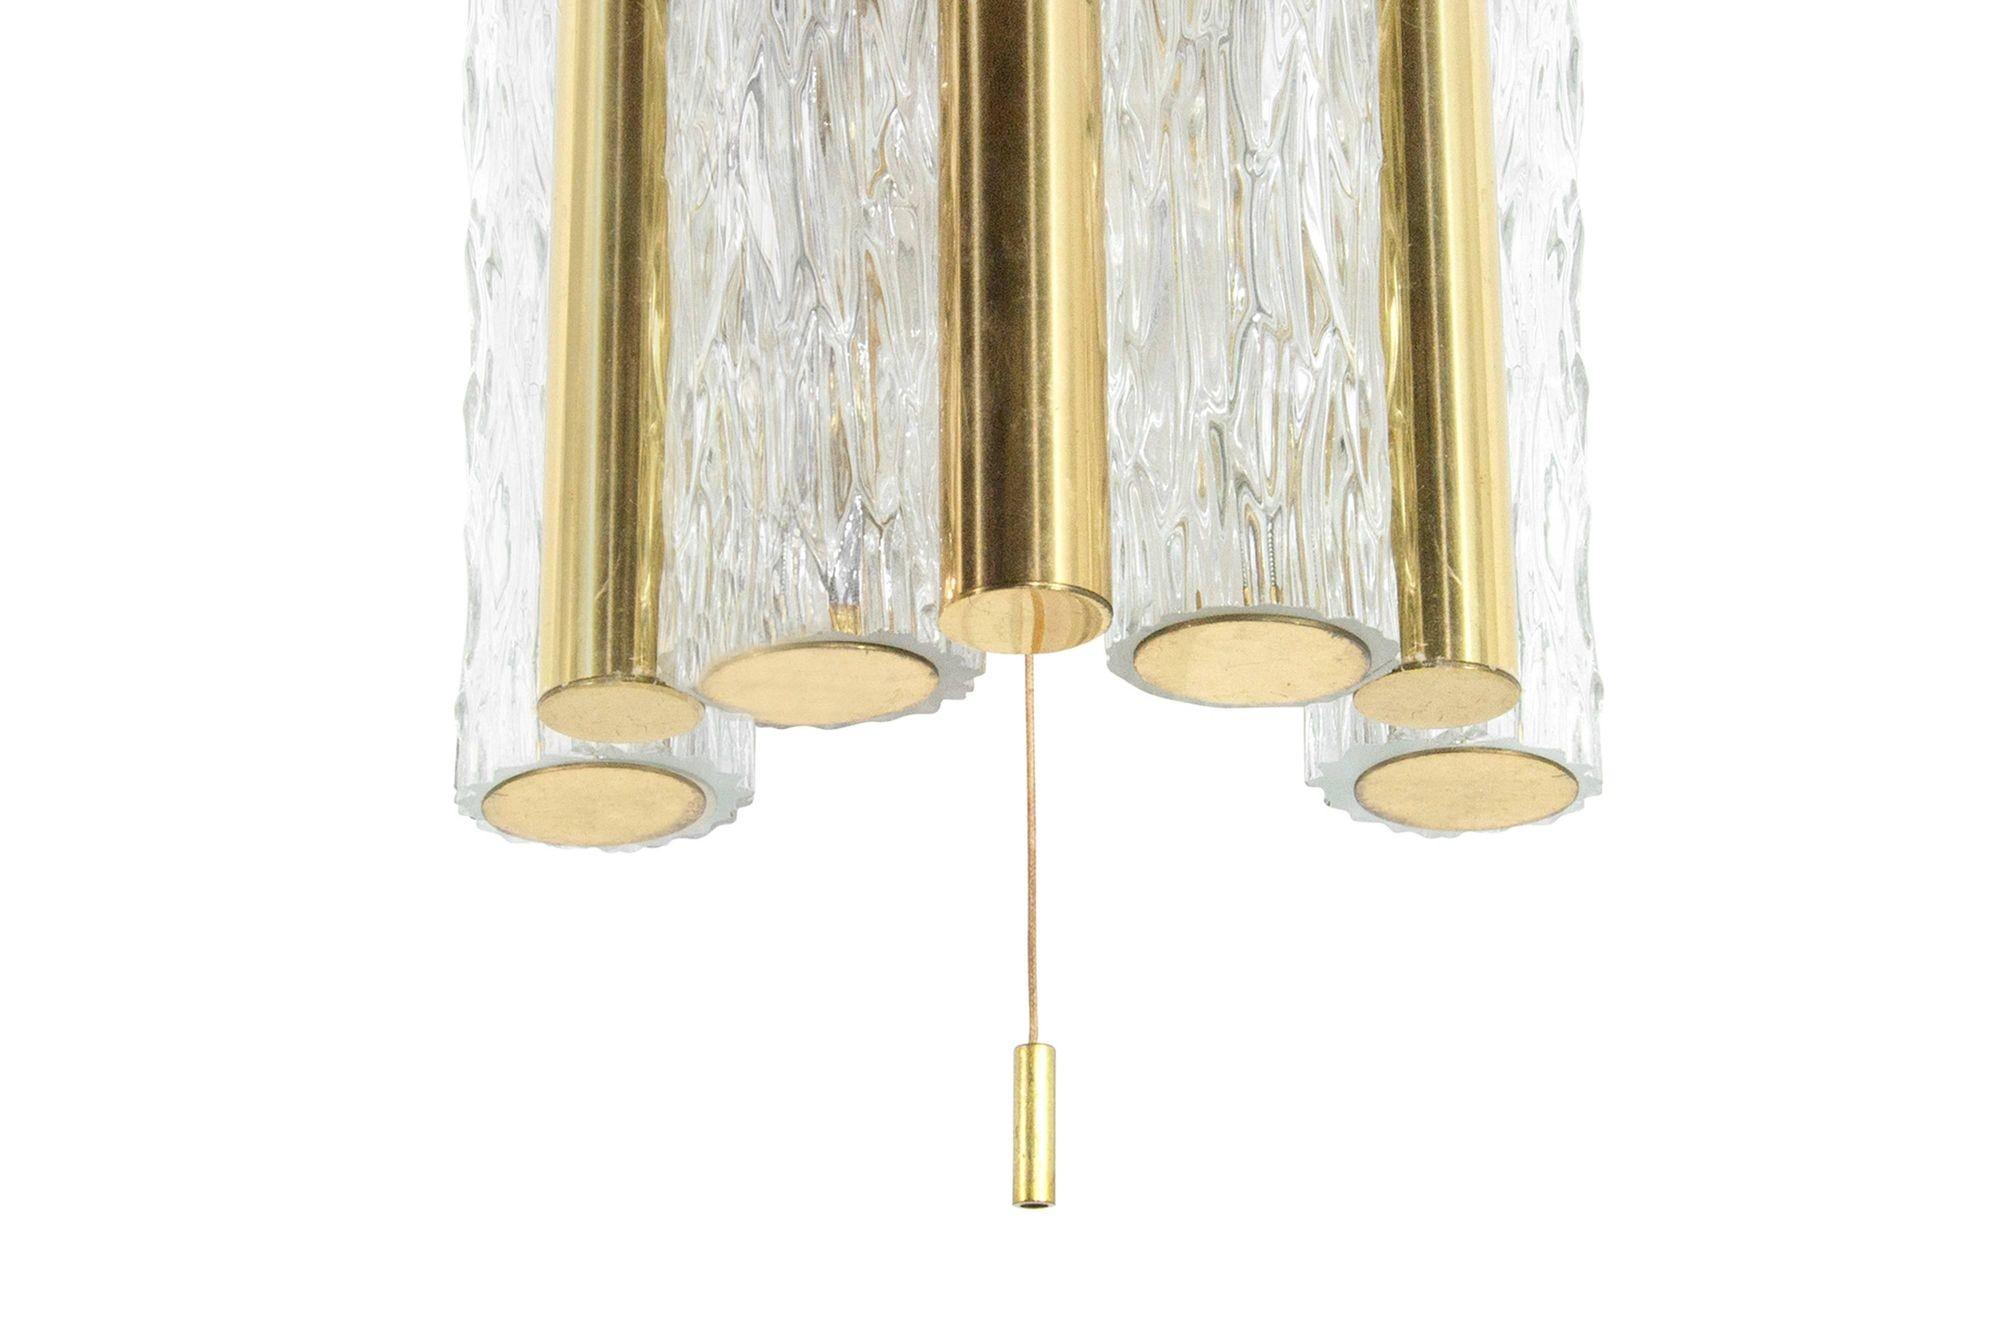 Set of Murano Glass and Brass Sconces by Doria Leuchten, Germany, C. 1960s For Sale 1